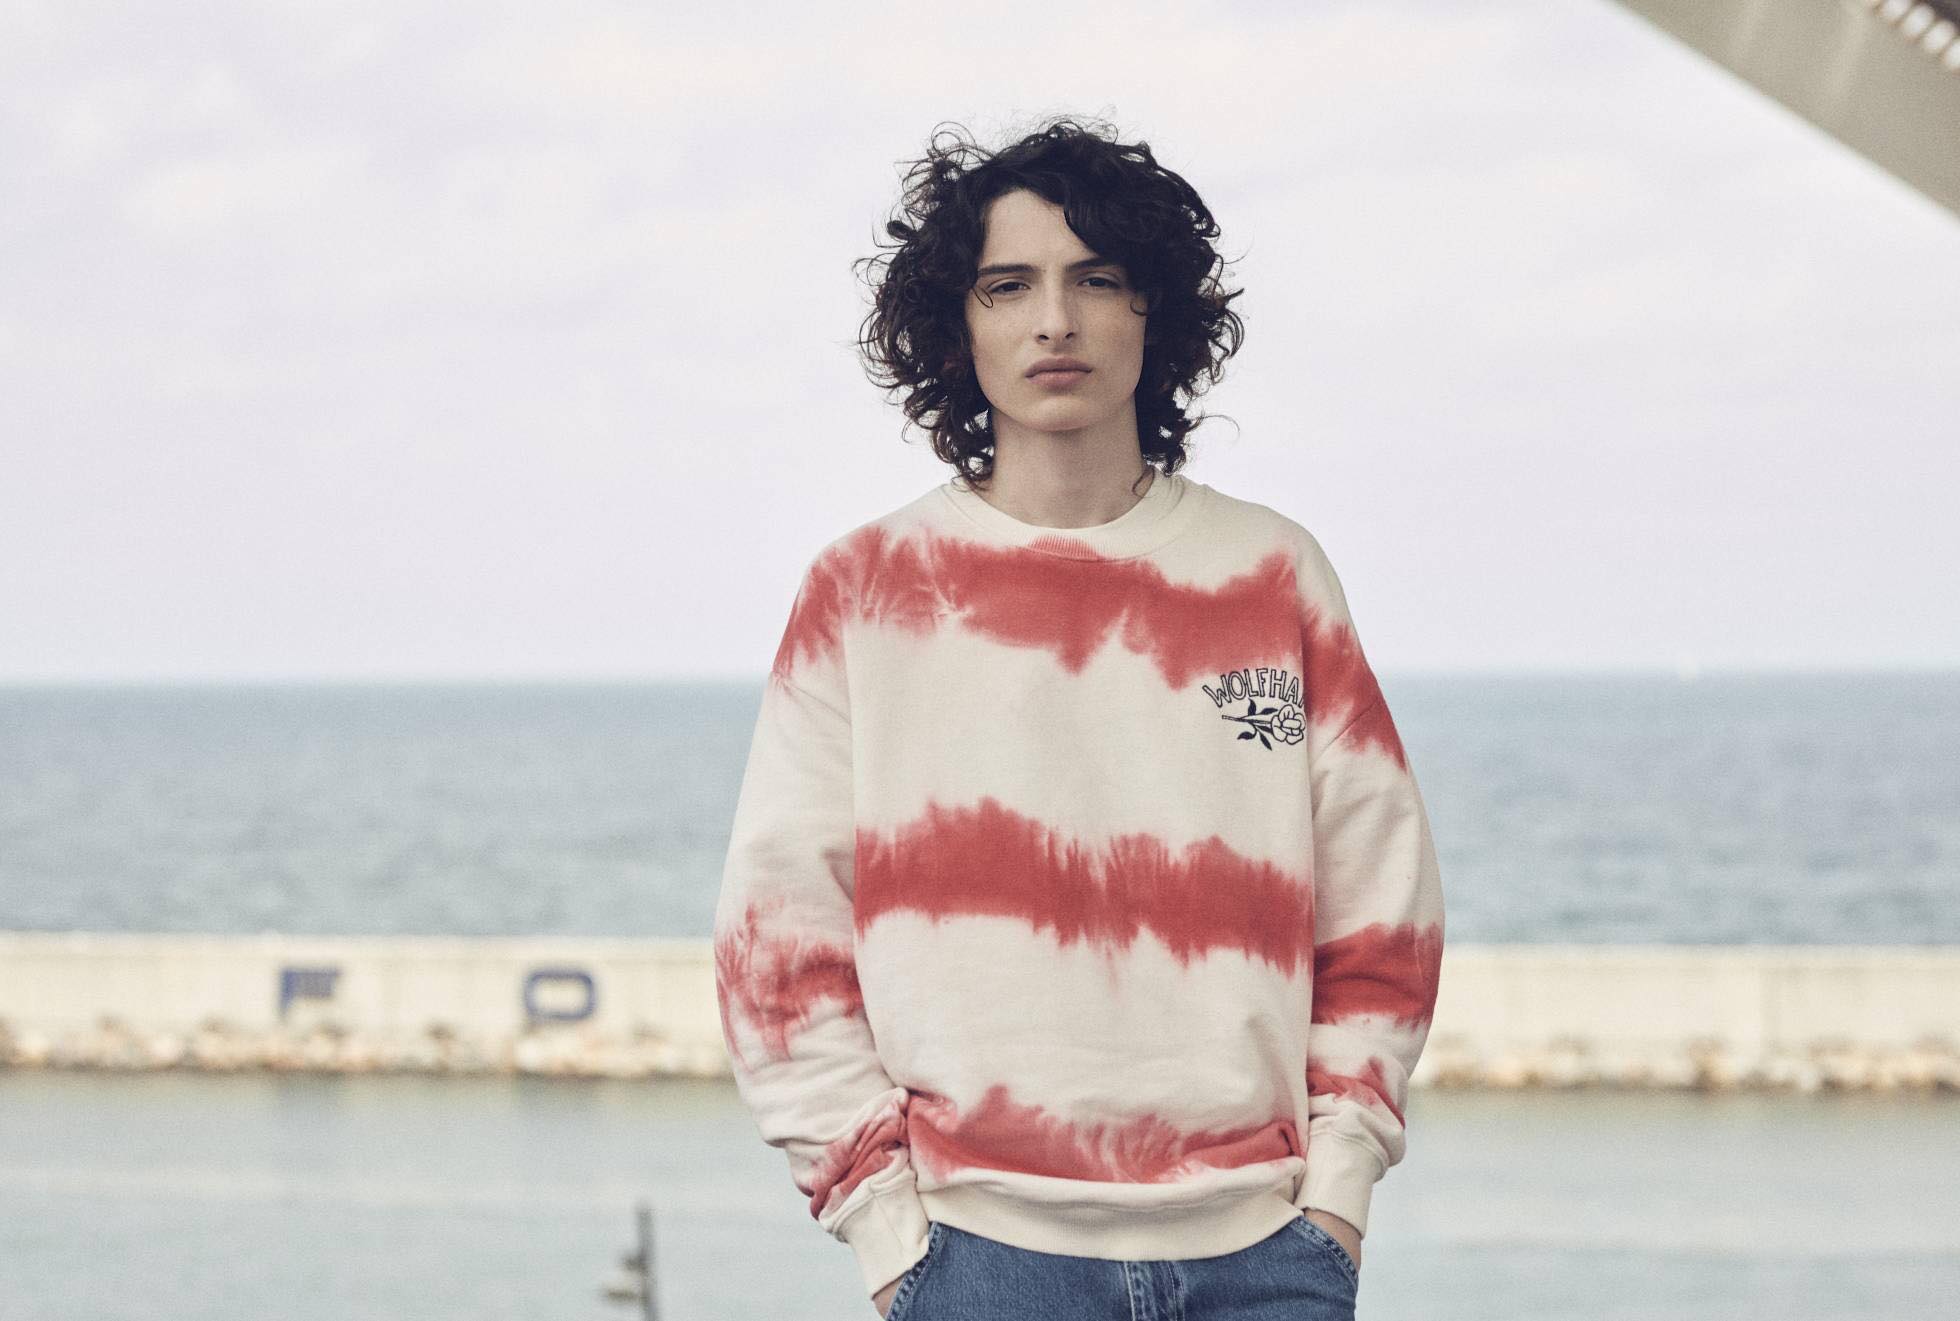 All present day Grudge Pull and Bear Capsule Collection ~ April 2019 - Finn Wolfhard Photo  (43174473) - Fanpop